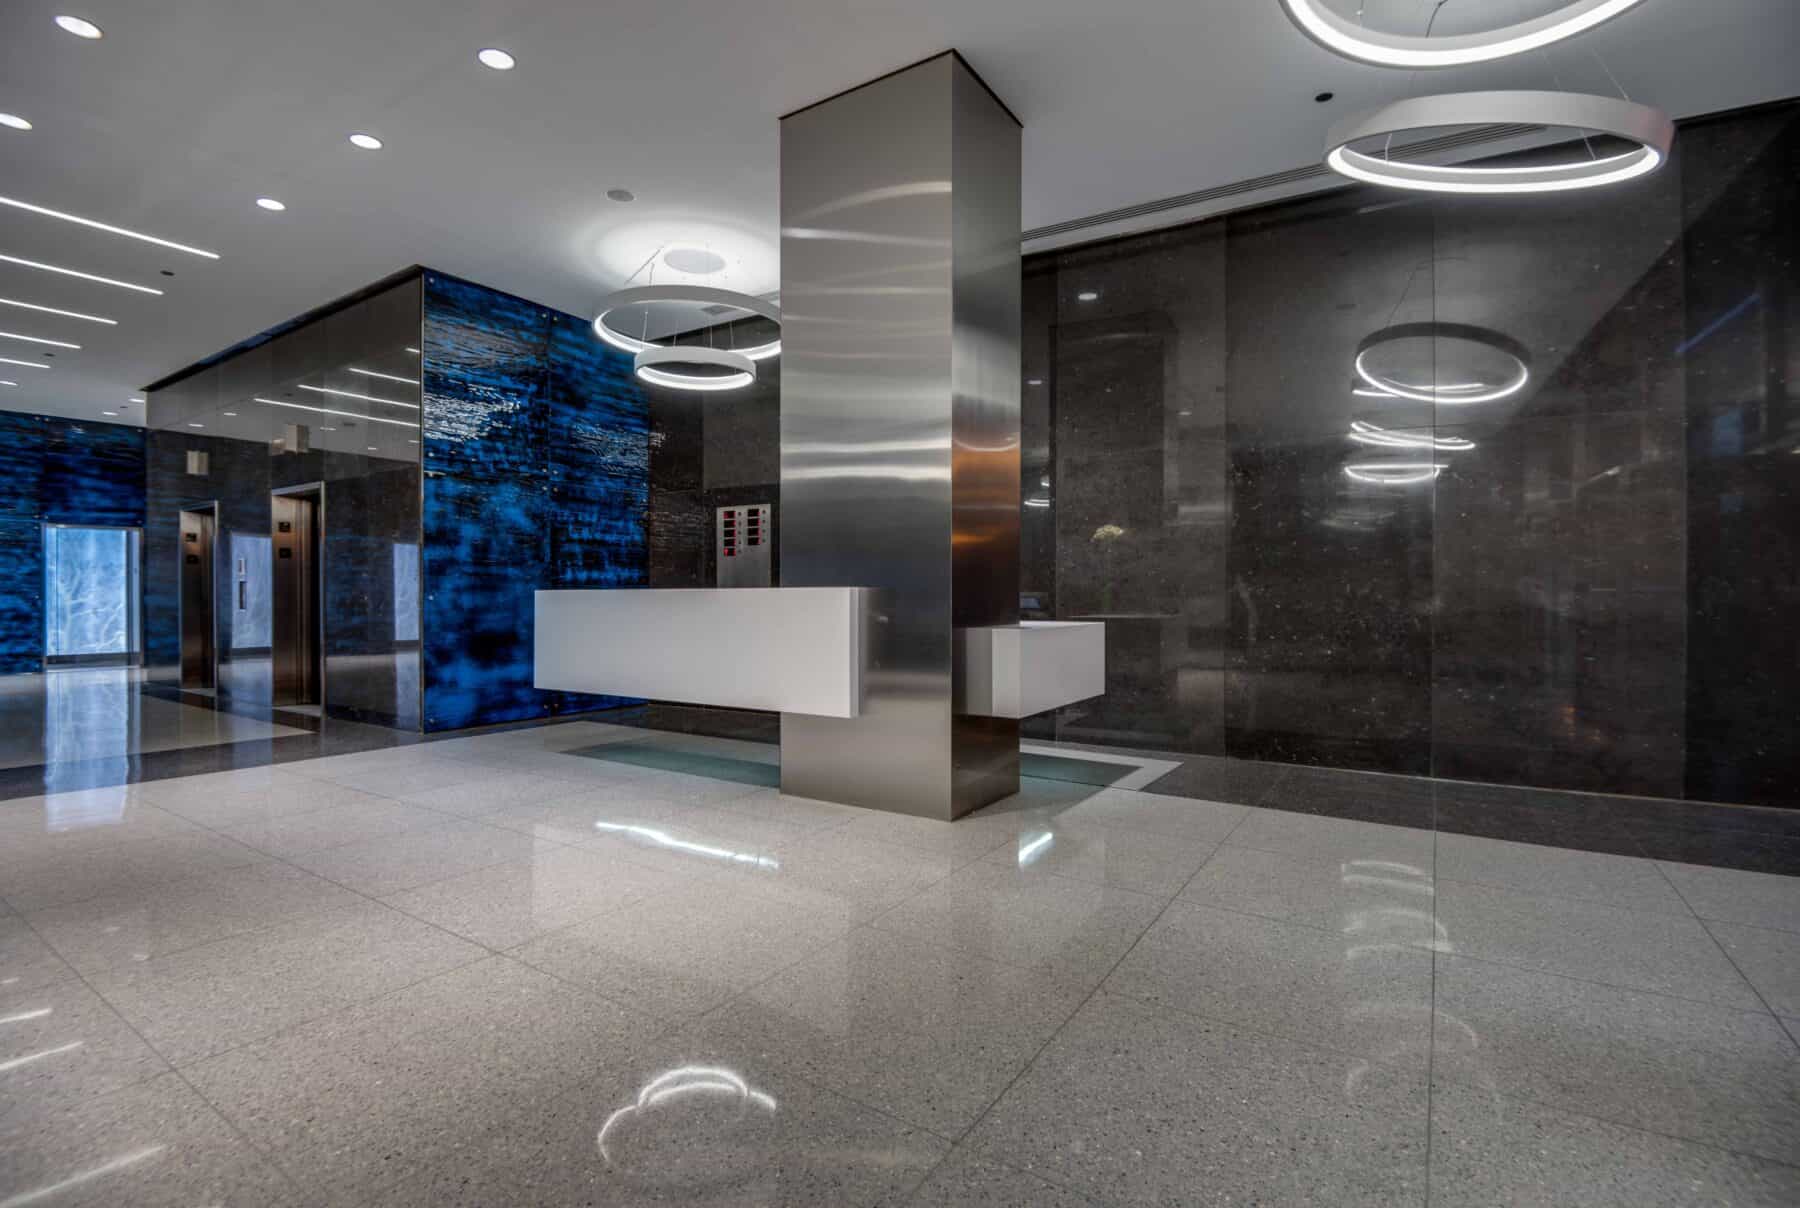 Michigan Avenue Lobby Remodel with Glass Wall Panels, Floating Reception Desk and Suspended LED Lights by Commercial Builder & General Contractor Structural Enterprises